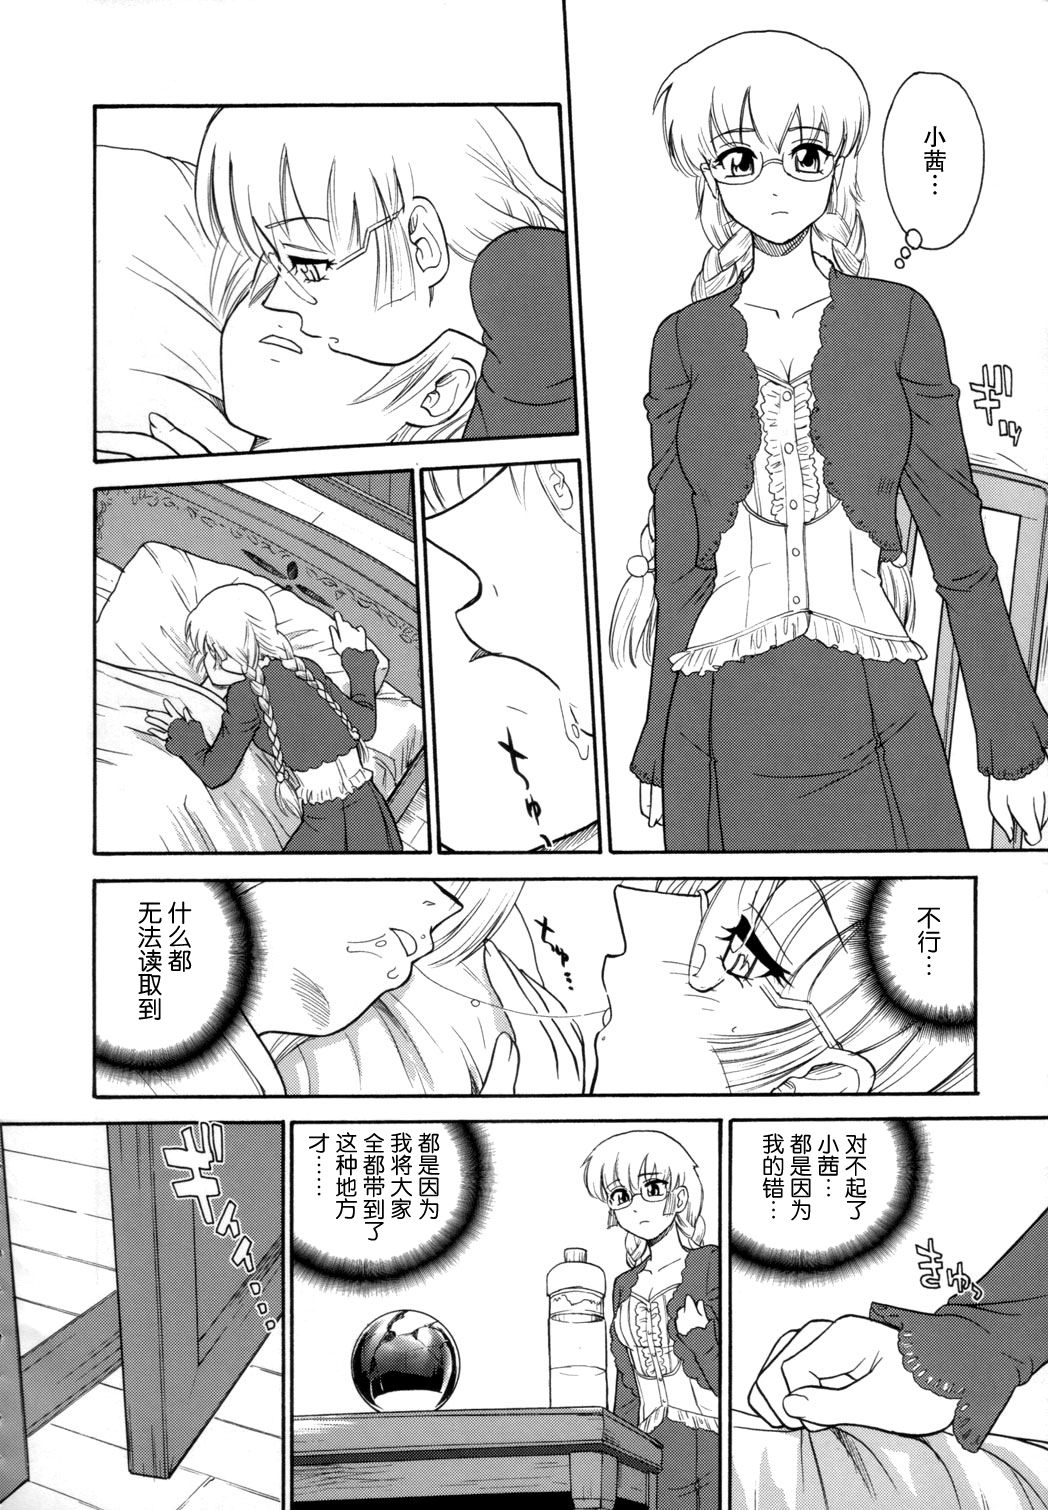 (C72) [Behind Moon (Q)] Dulce Report 9 | 达西报告 9 [Chinese] [哈尼喵汉化组] [Decensored] page 10 full